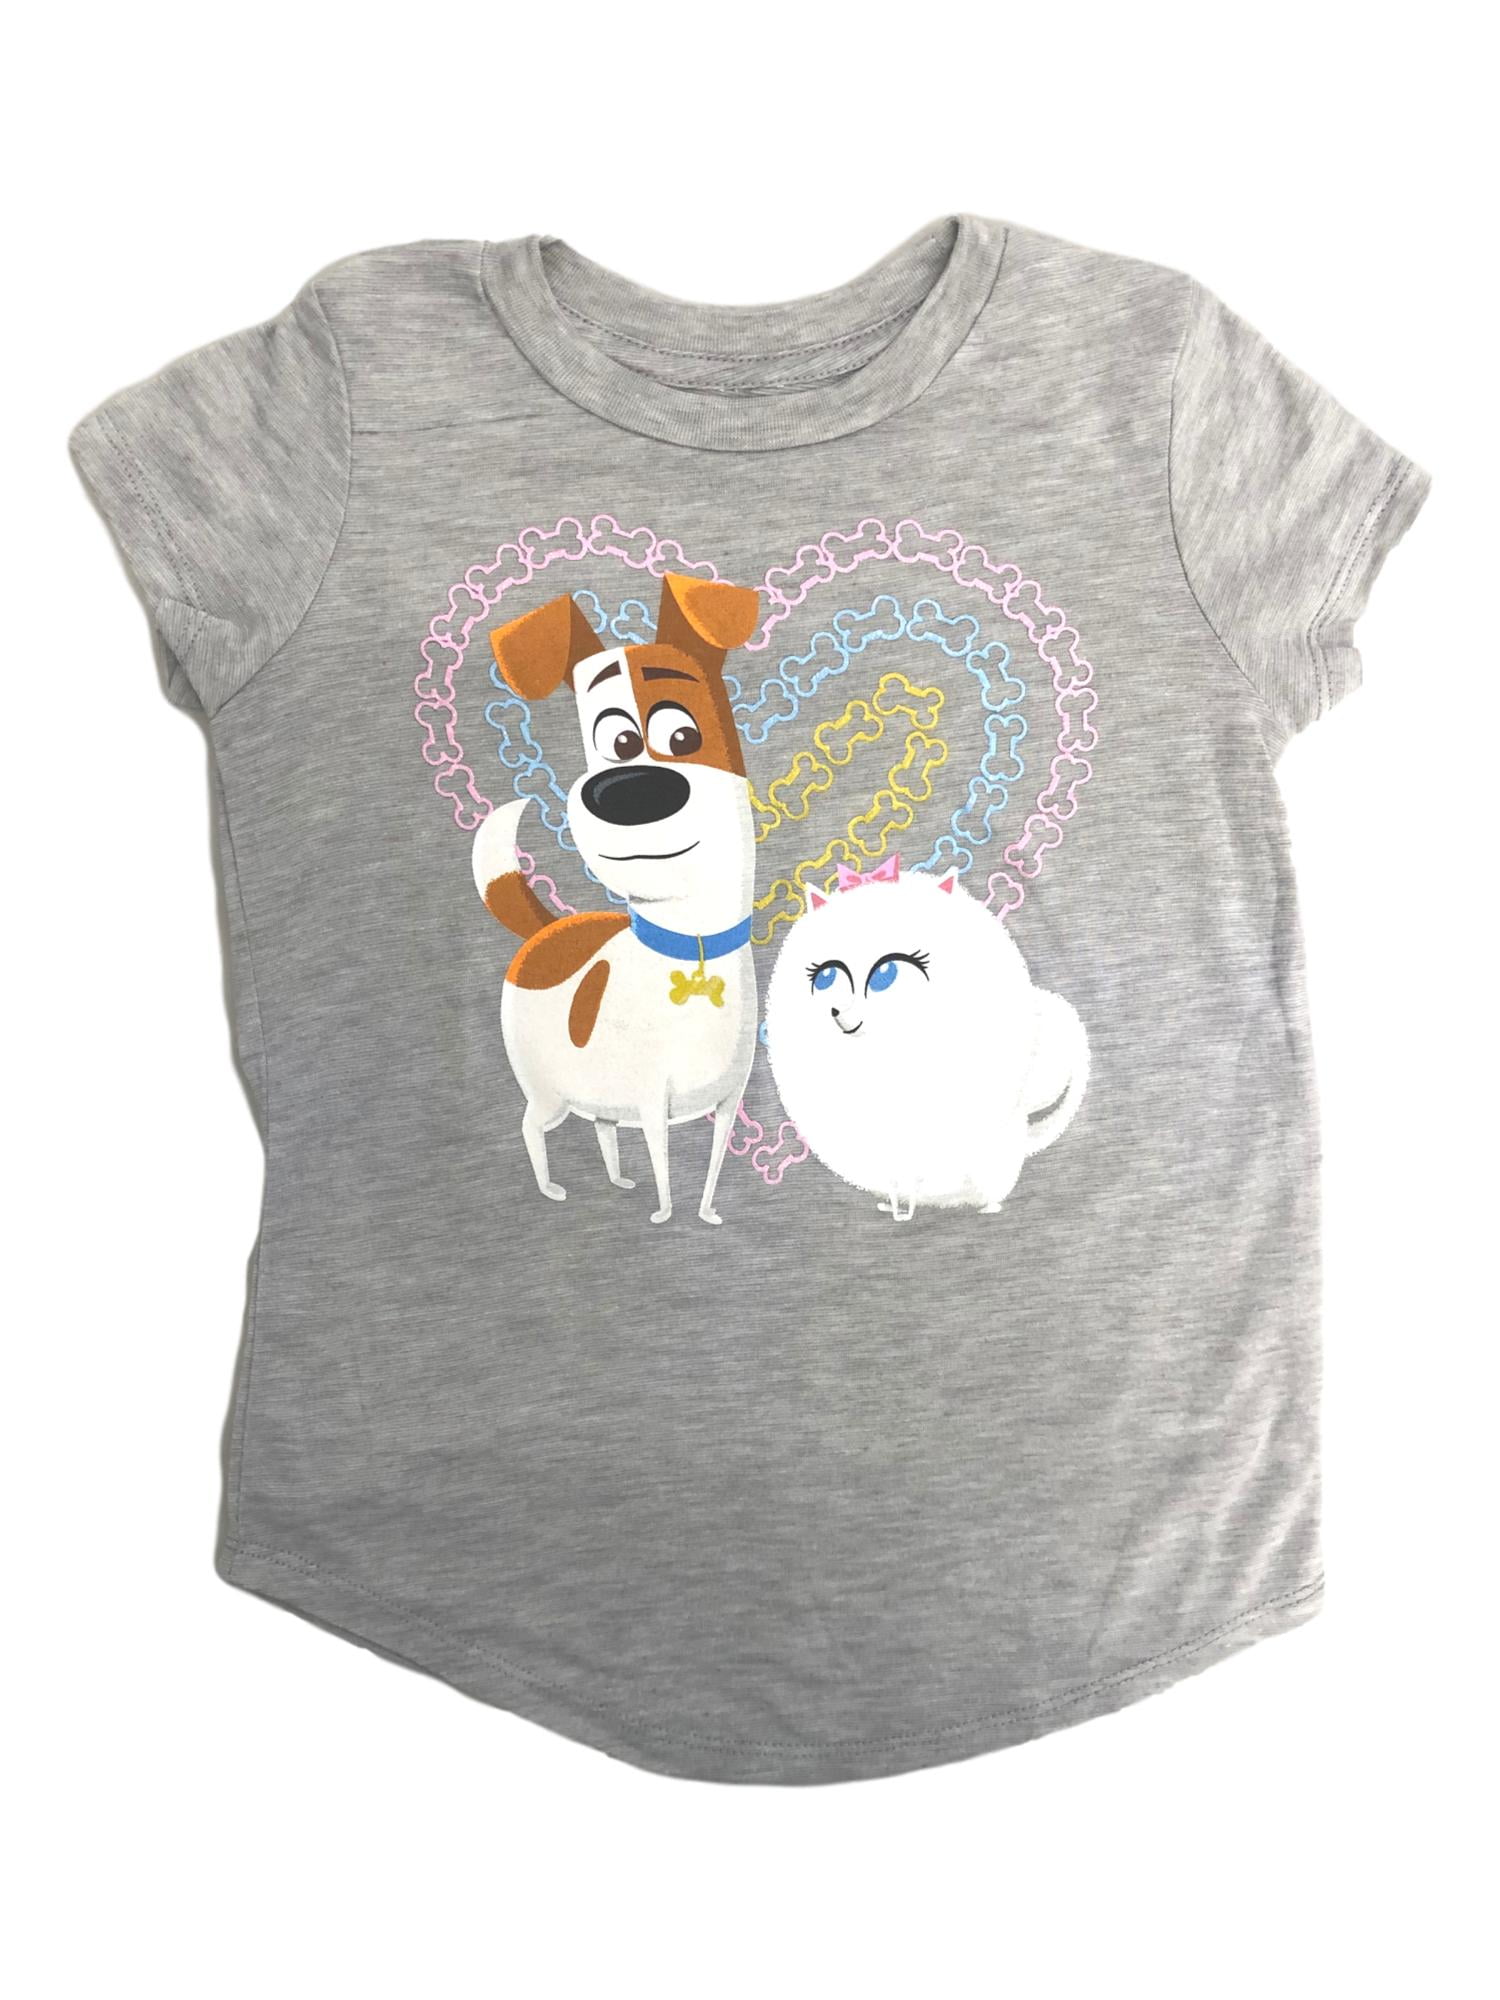 THE SECRET LIFE OF PETS GIDGET AND MAX SS SHIRT SIZE 2T 3T 4T 5T NEW! 